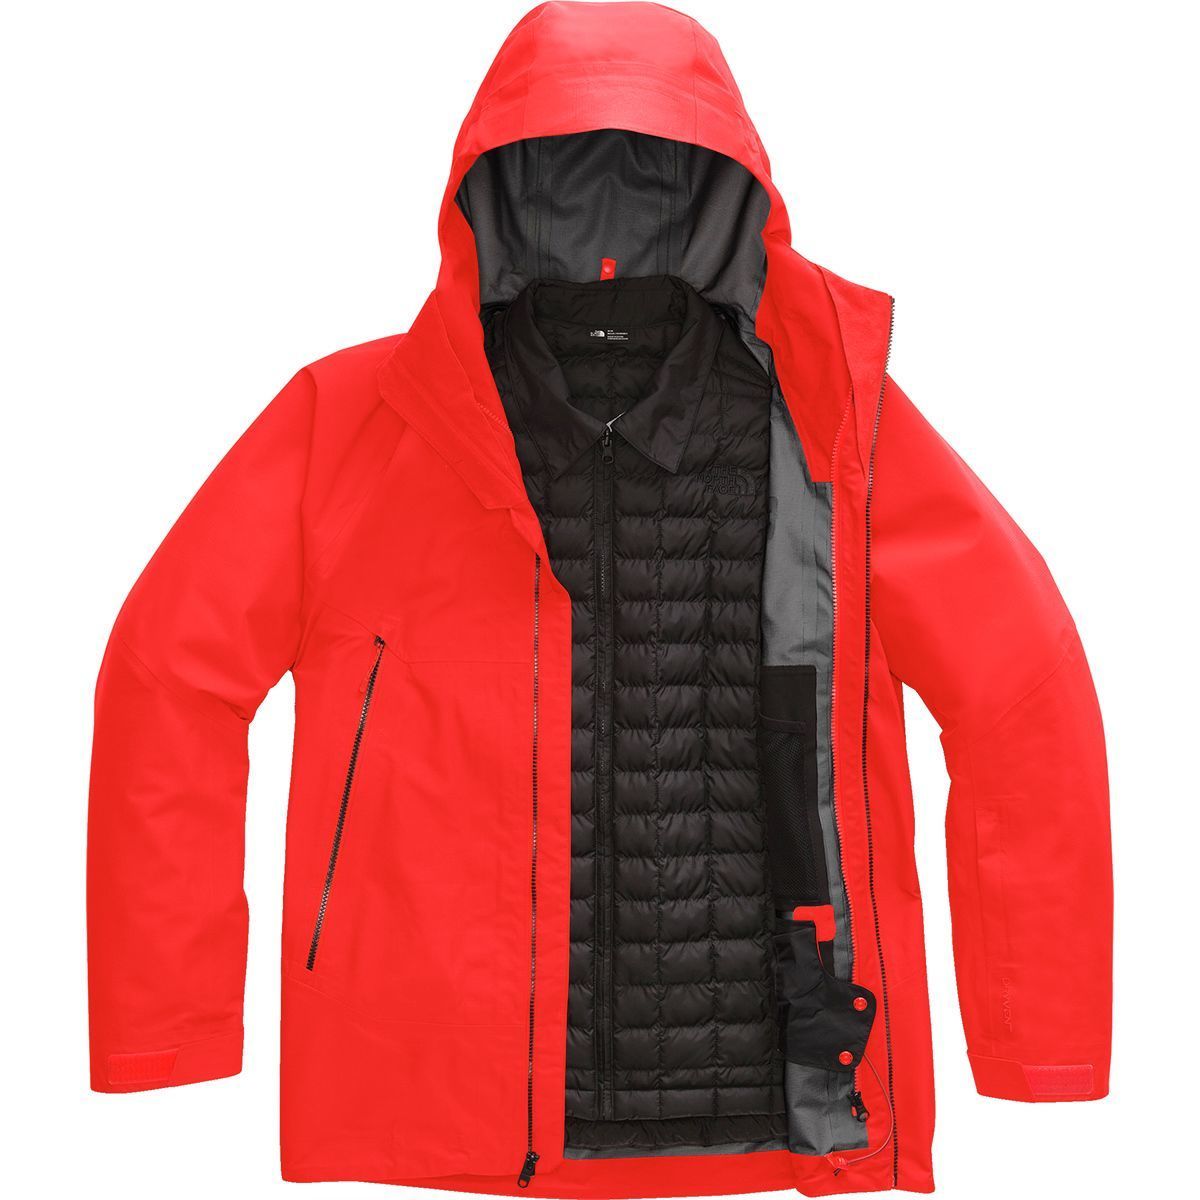 the north face men's alligare thermoball triclimate jacket